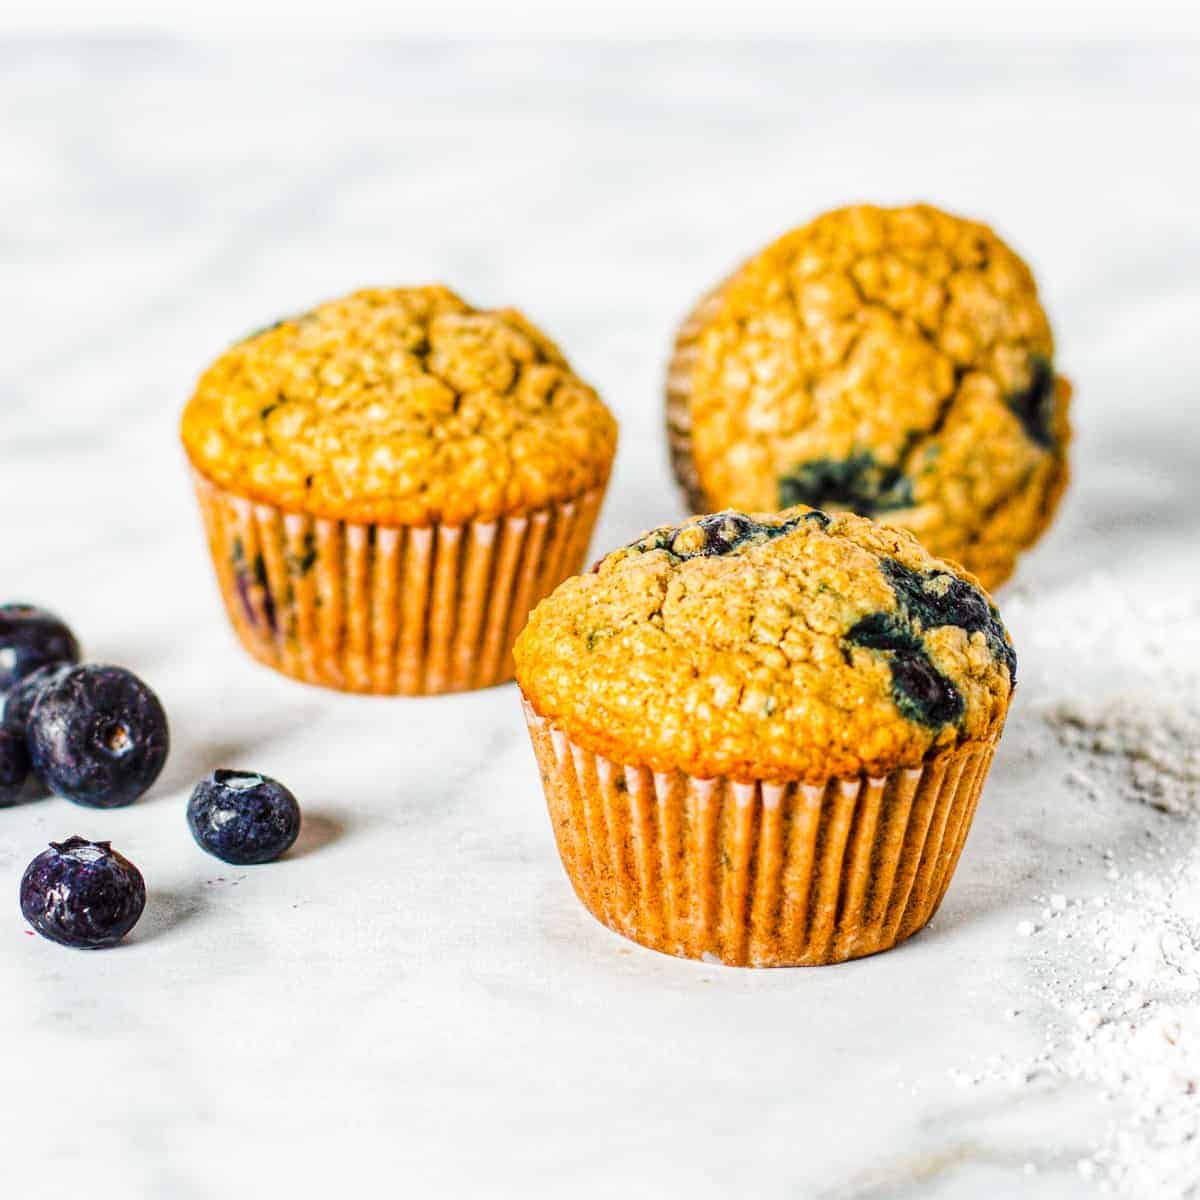 Three blueberry oatmeal muffins shown on a countertop with fresh blueberries.